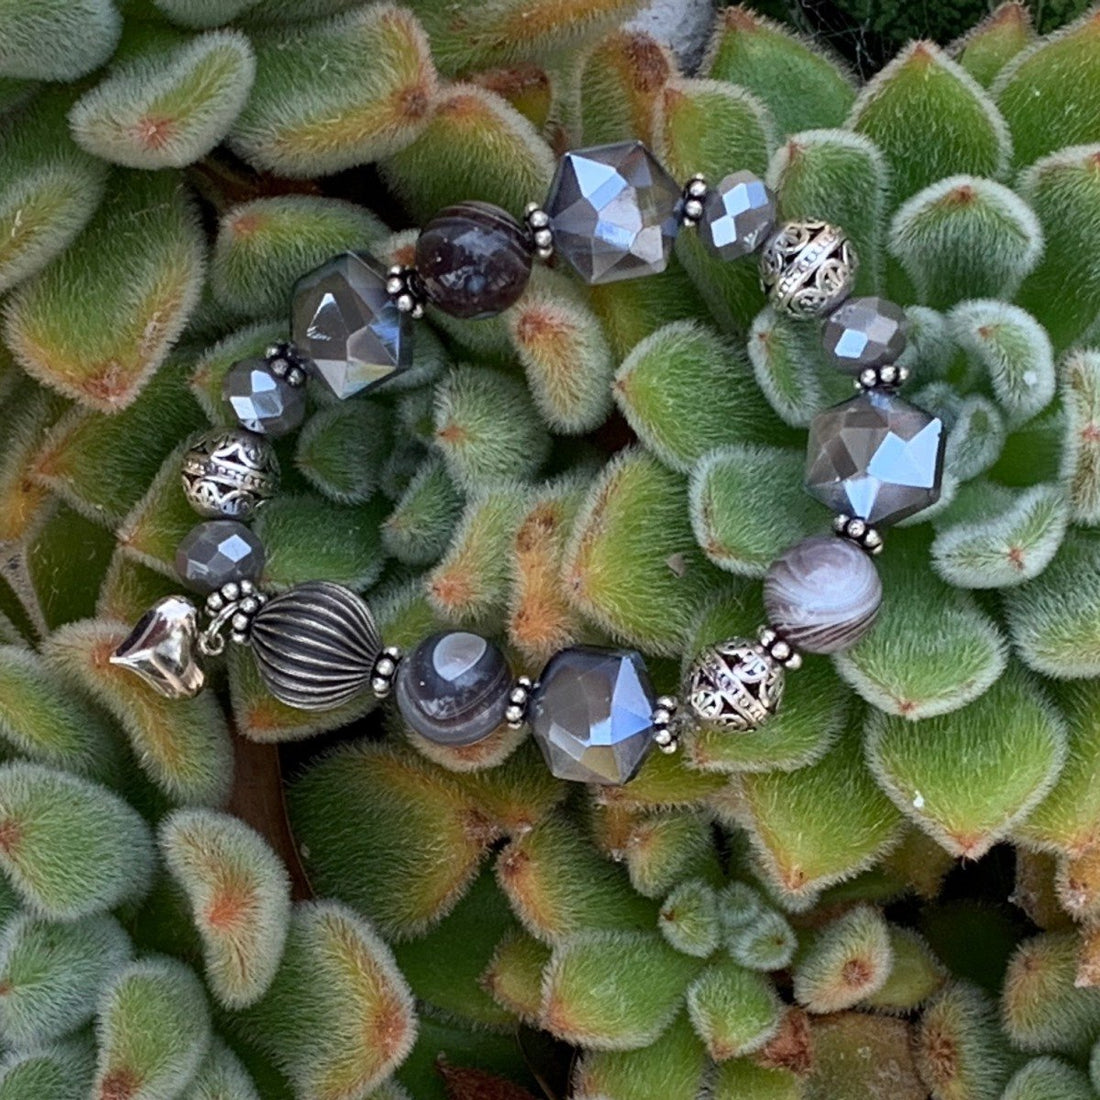 A bracelet made of Botswana Agate round beads with grey hexagon accents, antique silver beads & heart charm